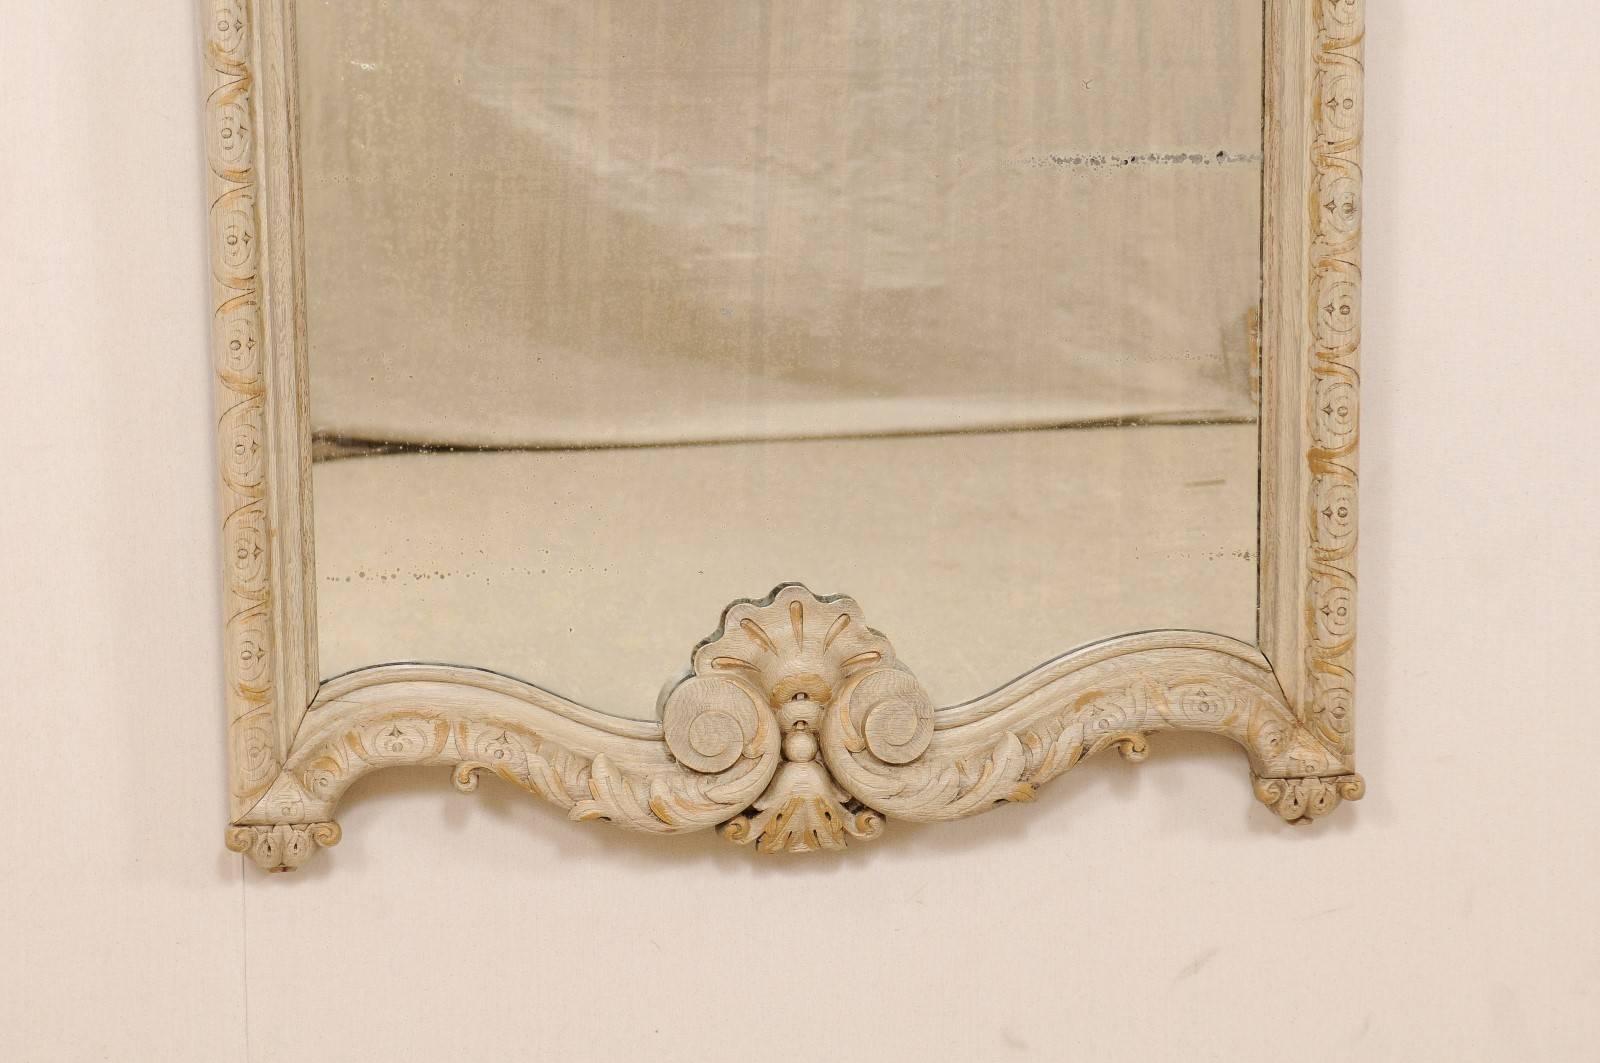 Glass Italian 19th Century Wood Mirror with Carved Egg and Dart, Scrolls and Cartouche